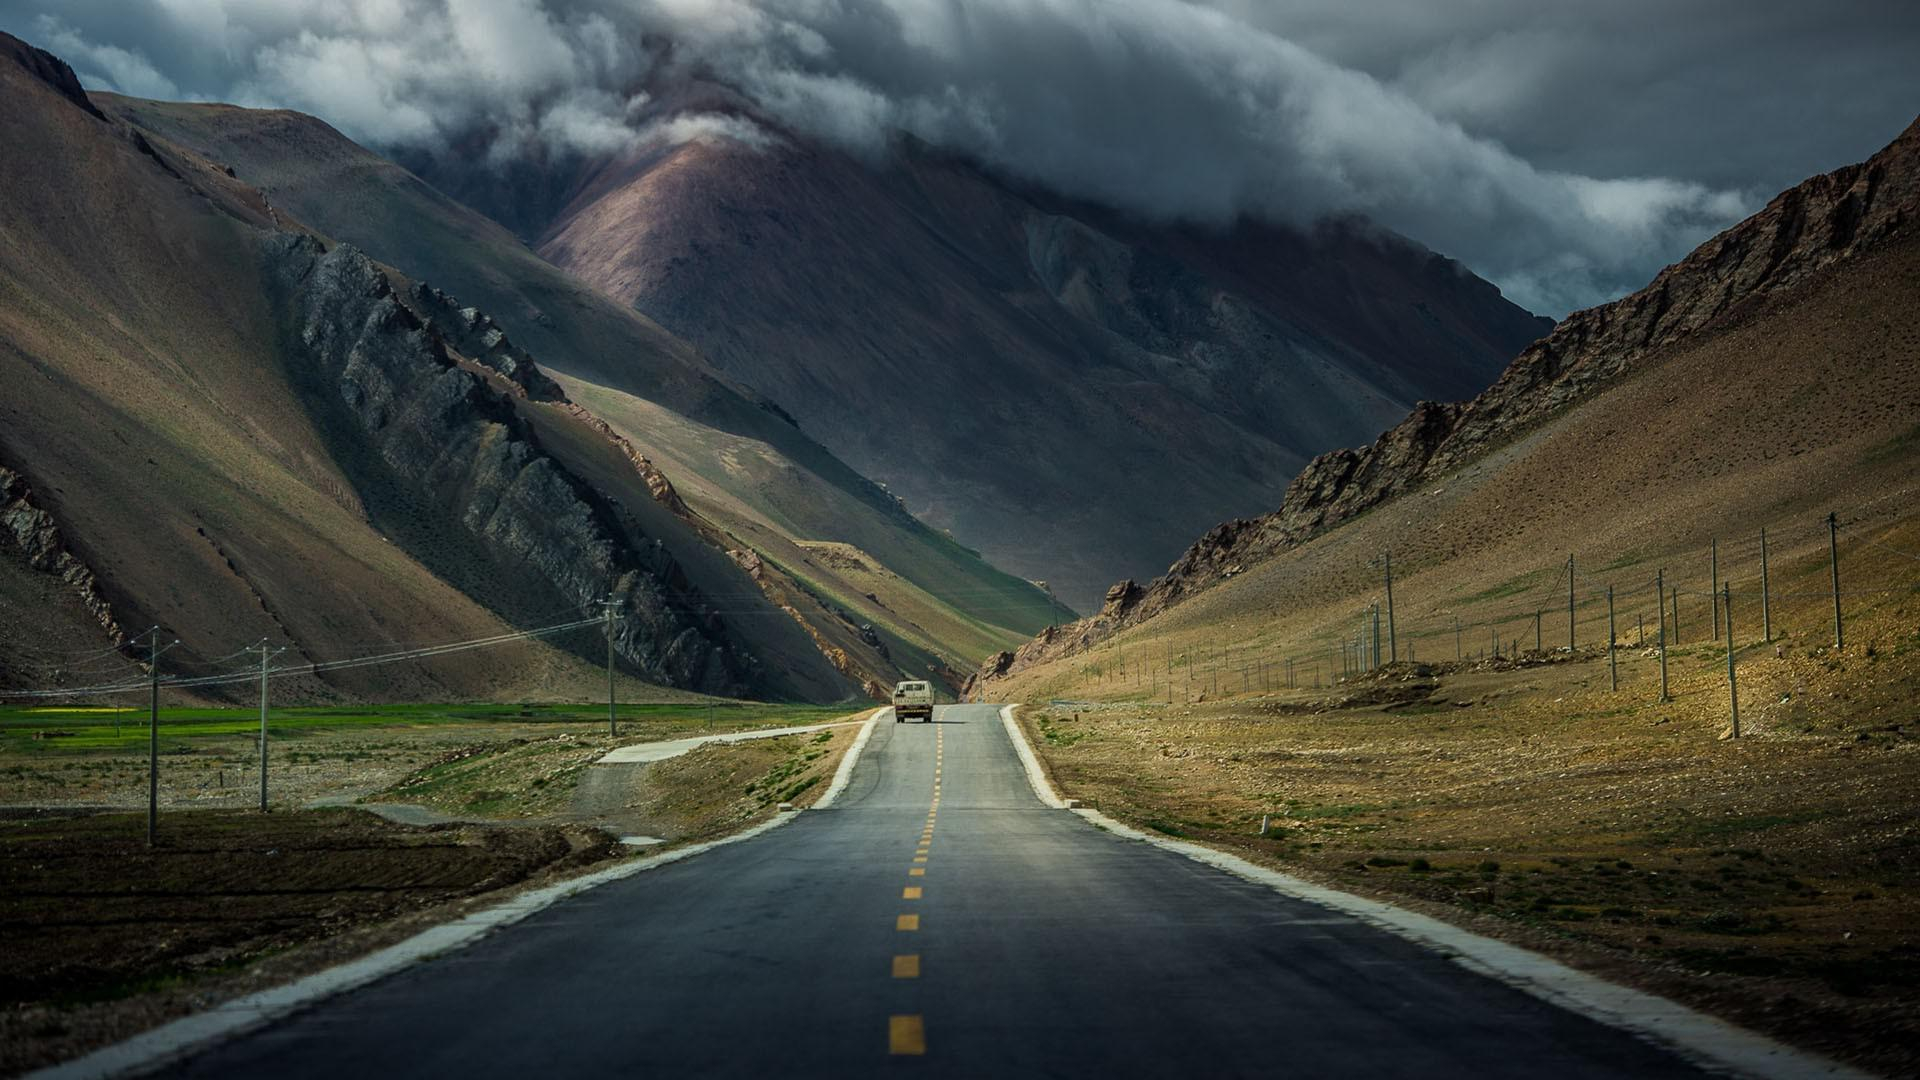 1920x1080 Download wallpaper for 2560x1080 resolution | Road in Tibet | nature and landscape | Wallpaper Better